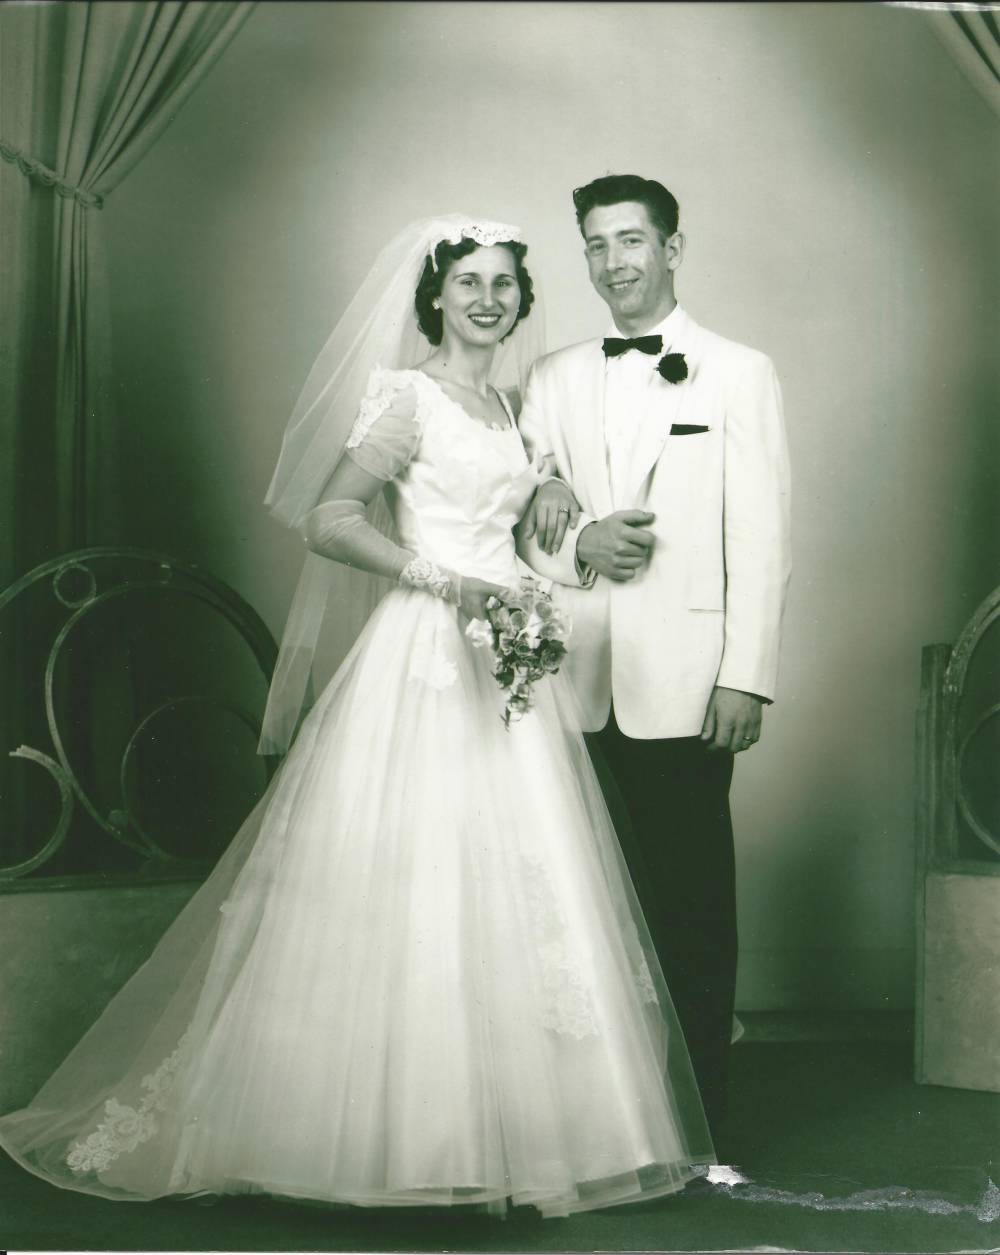 Amanda's grandparents on their wedding day. Amanda's grandma Jane taught her to sew and inspired her career as a dressmaker.